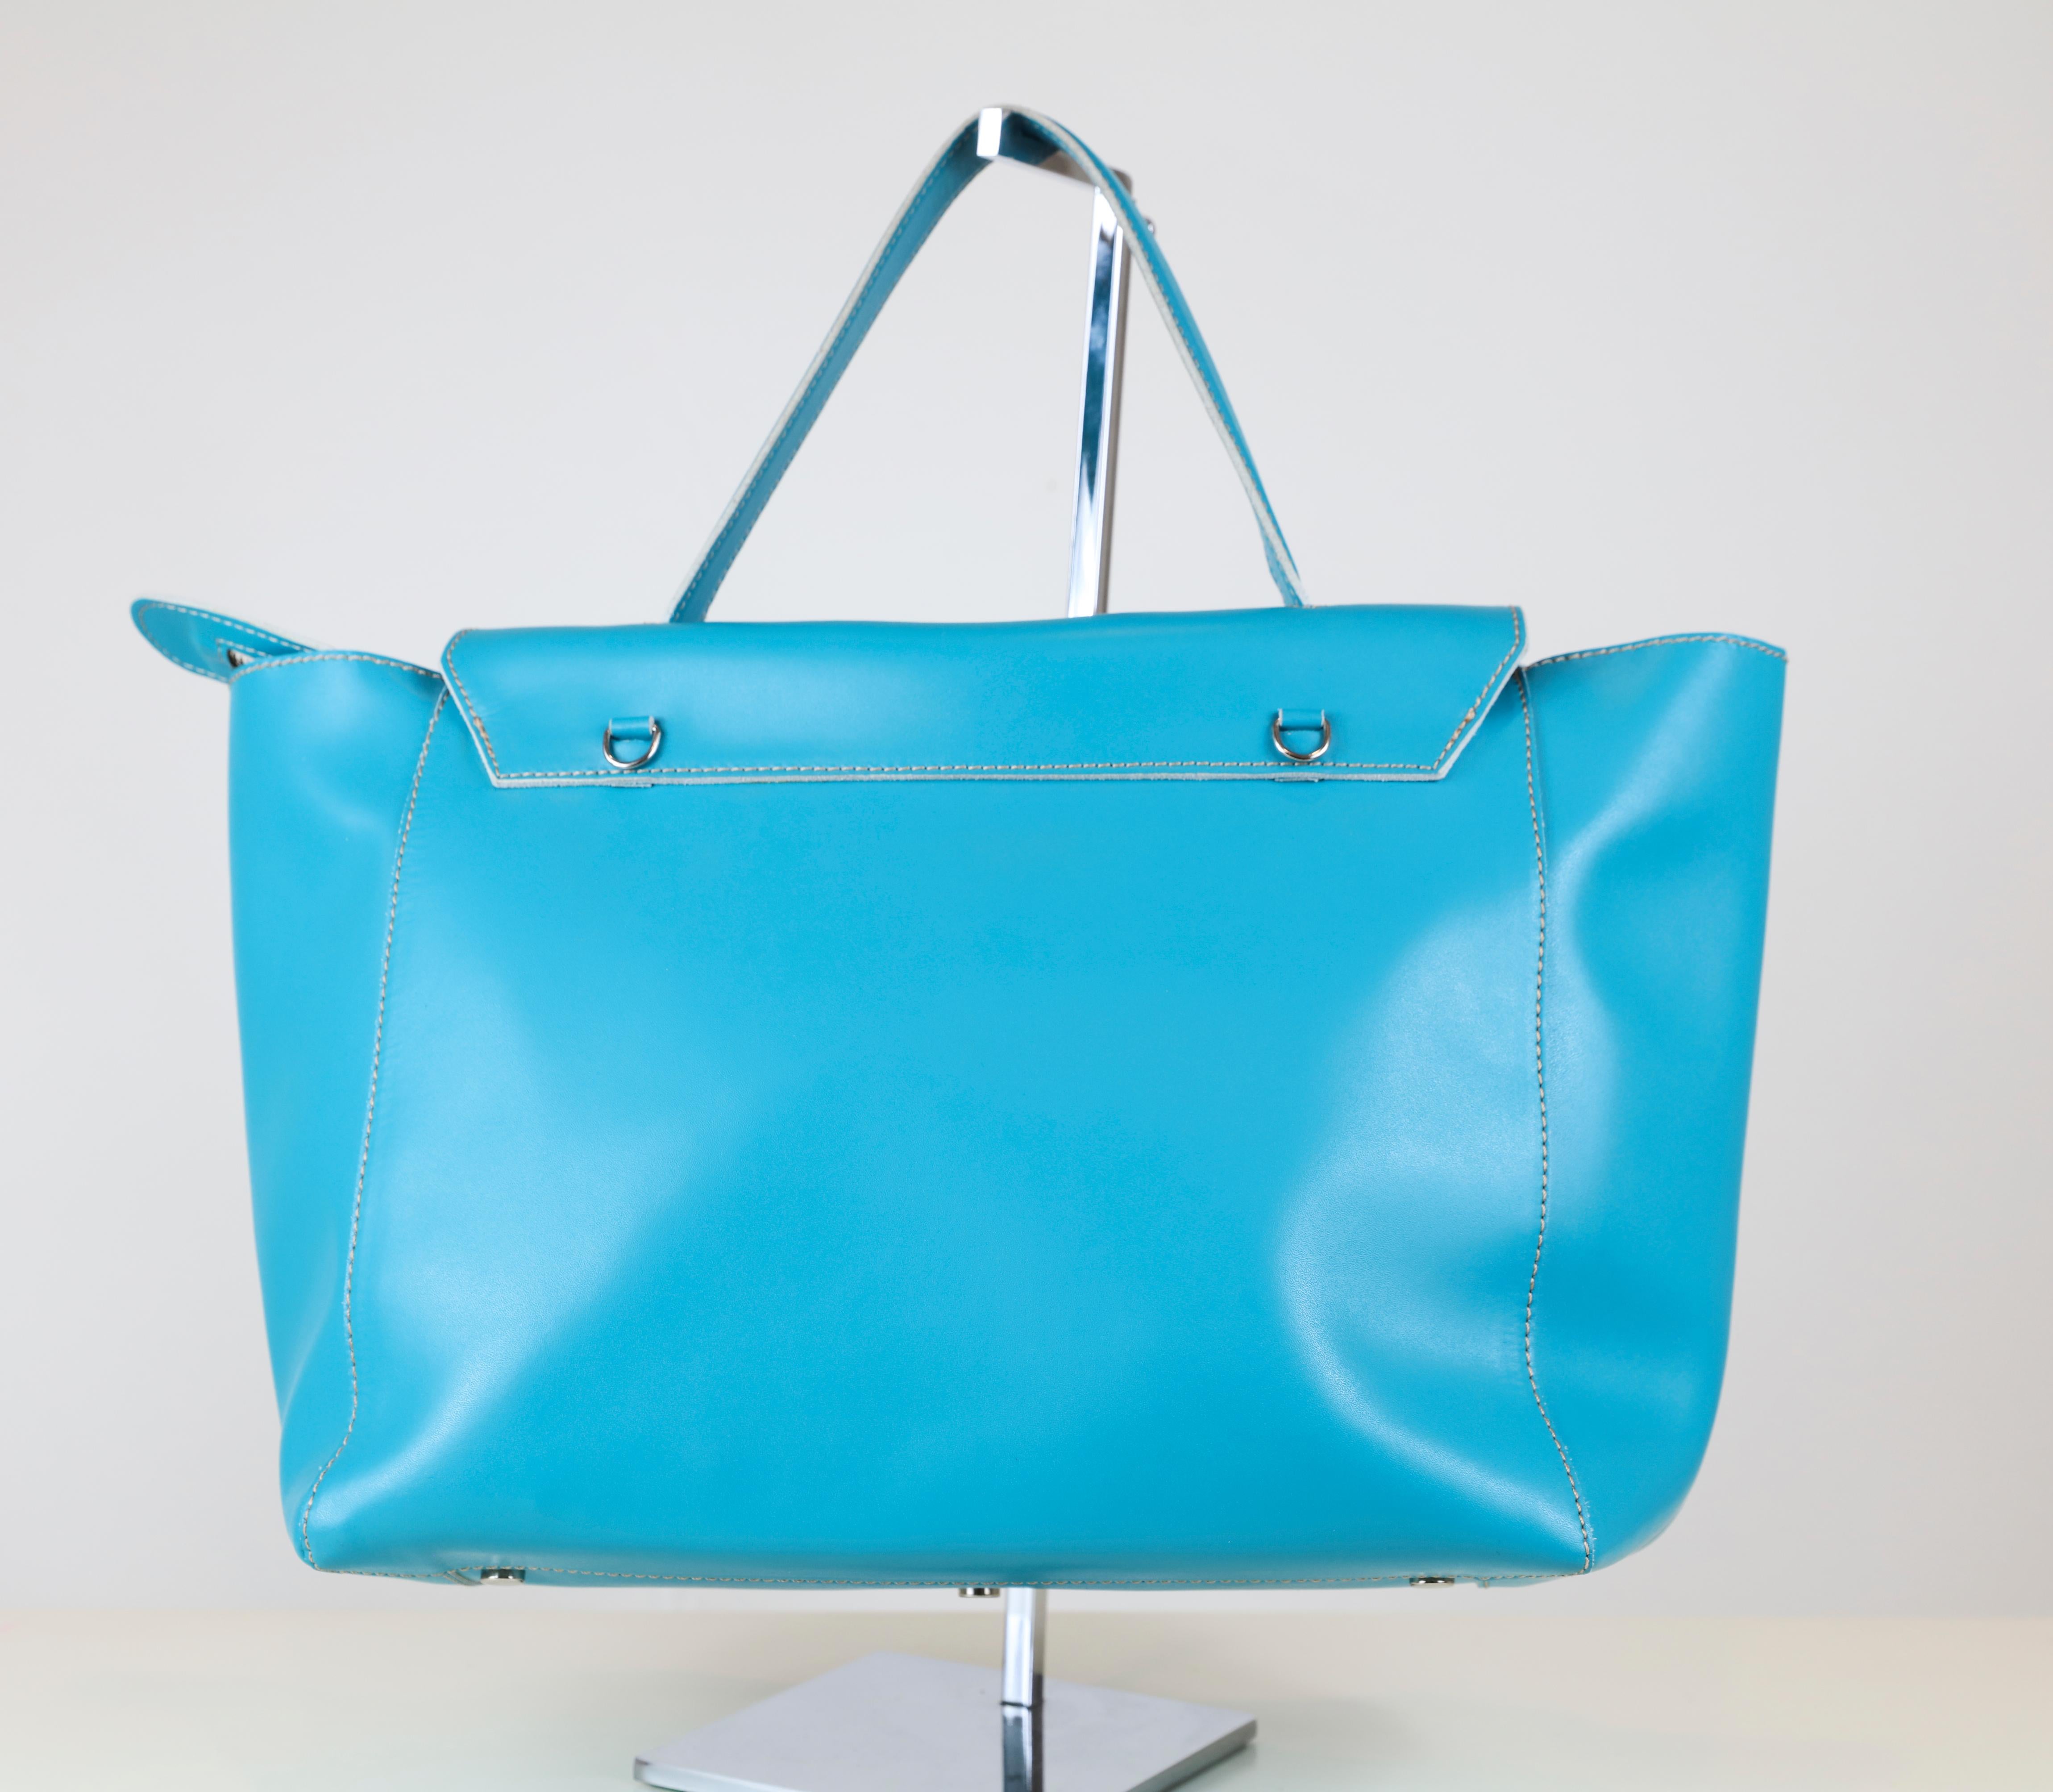 Alexandra DeCurtis Turquoise/Aqua, Leather, Calf Skin Satchel Bag with Removable Cross Body Strap